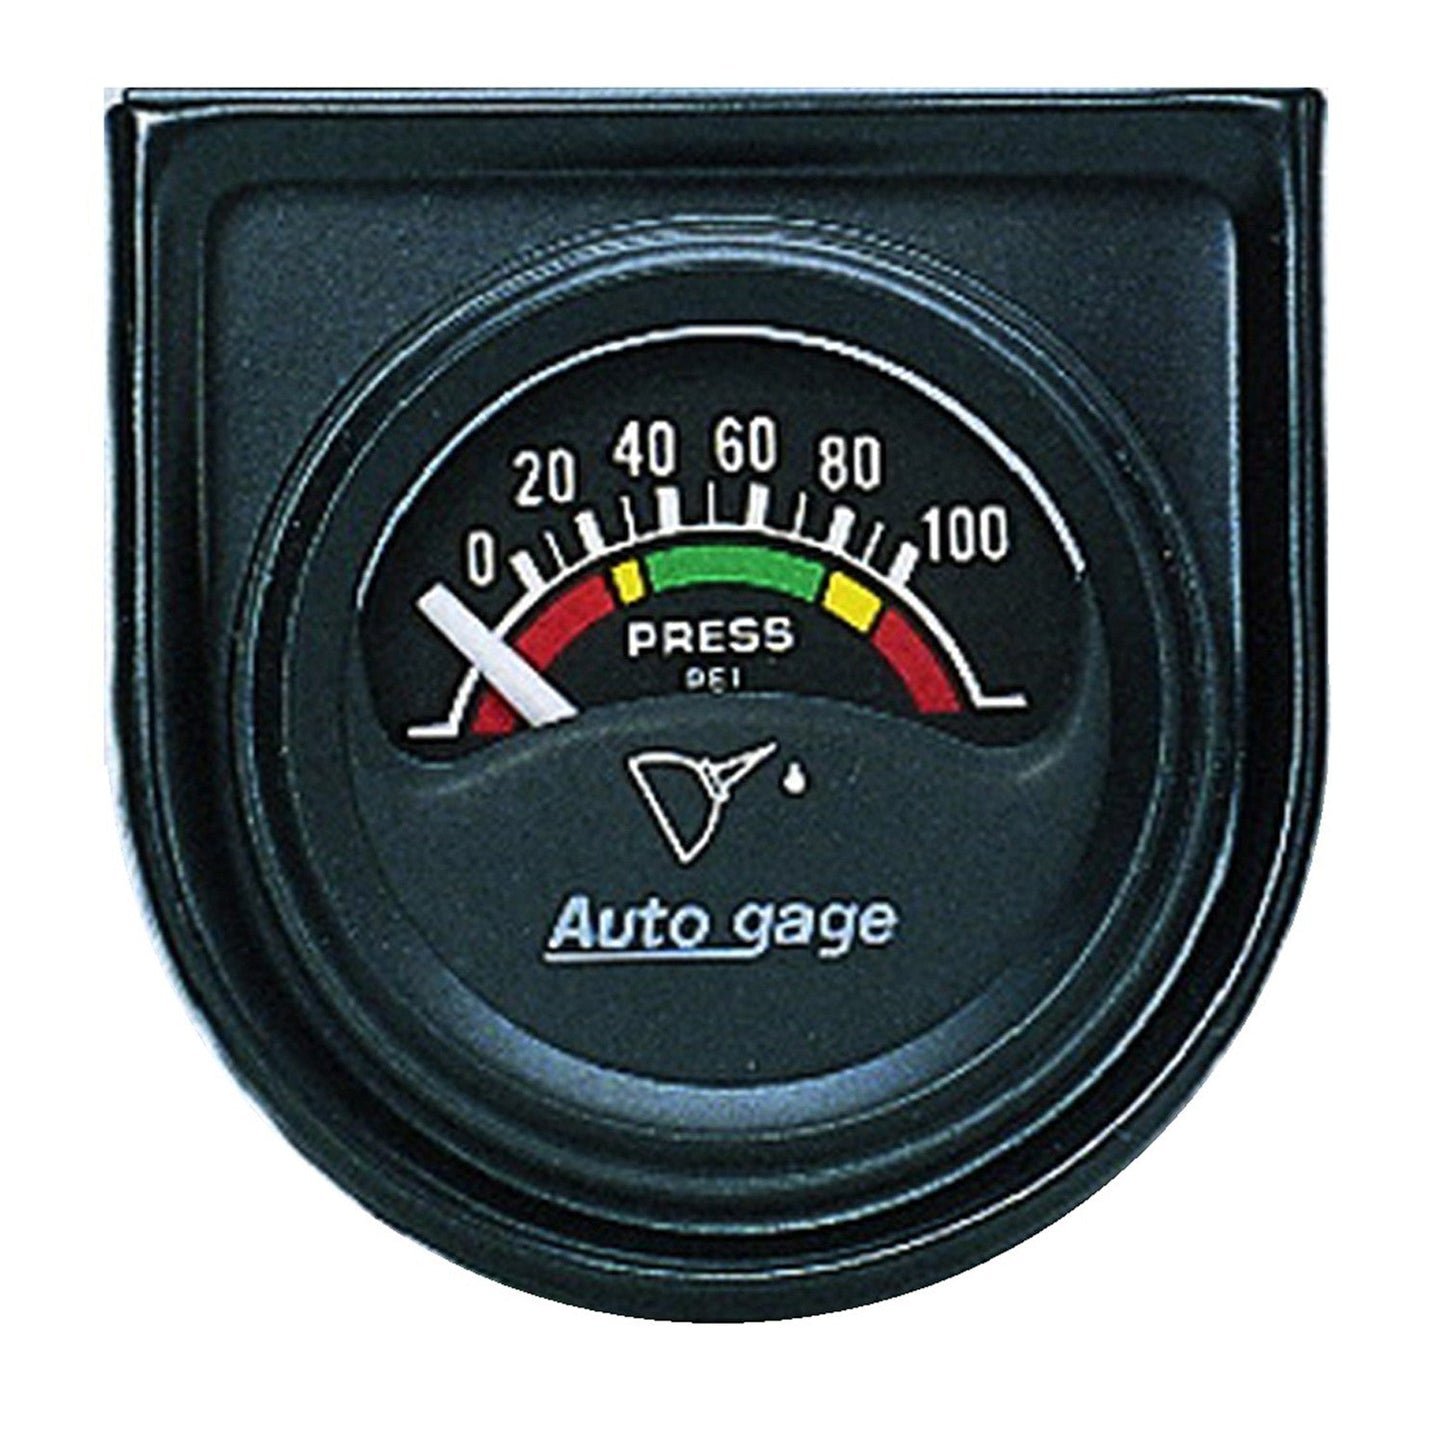 AutoMeter - 1-1/2" OIL PRESSURE, 0-100 PSI, AIR-CORE, SHORT SWEEP, AUTO GAGE  (2354)